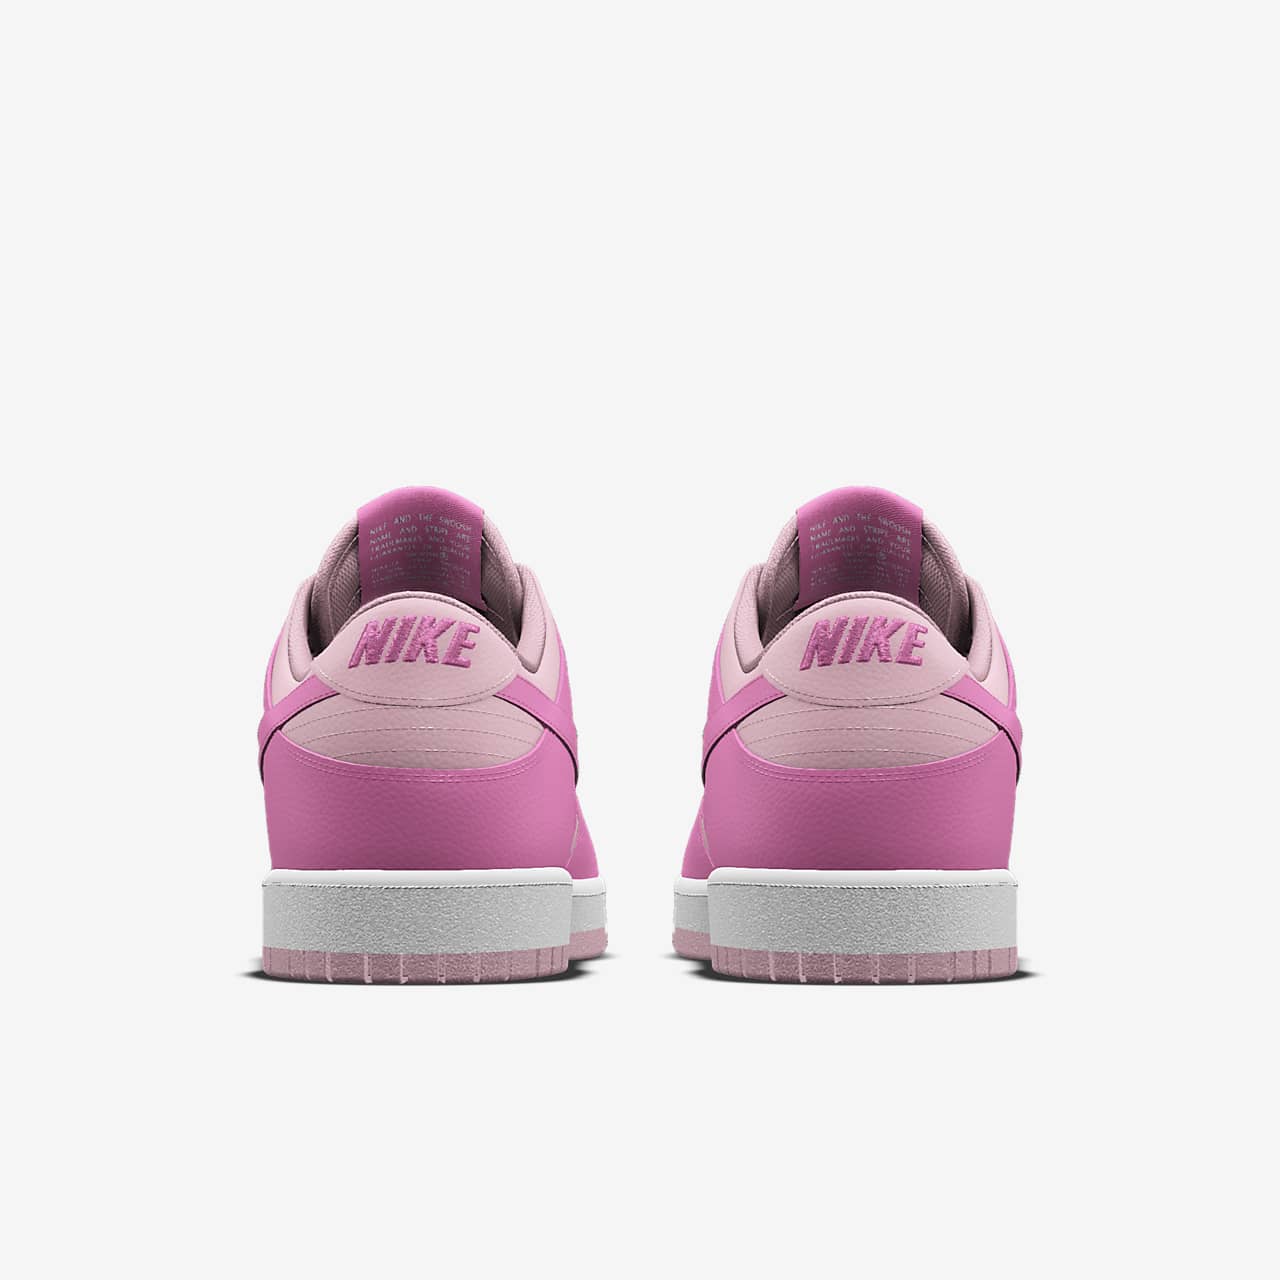 NIKE DUNK LOW NIKE BY YOU